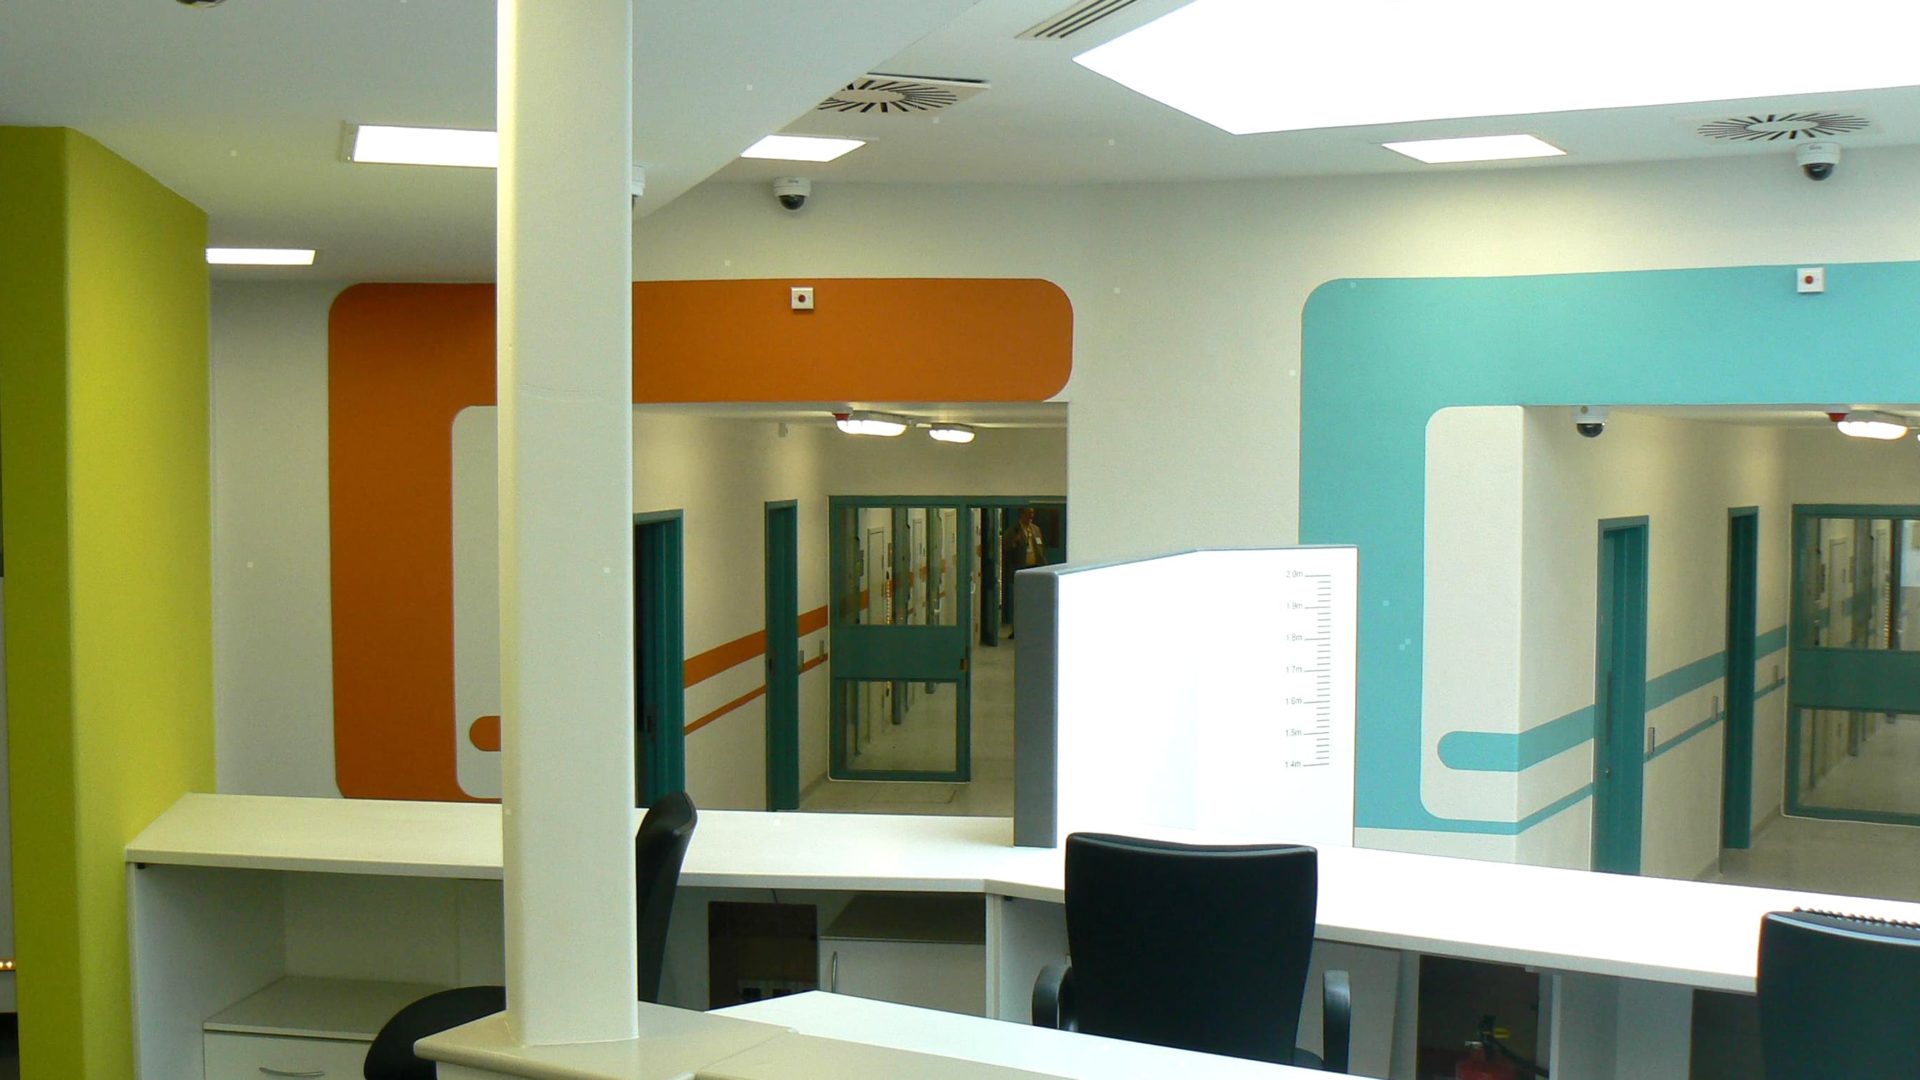 cells and chairs in northampton criminal justice centre